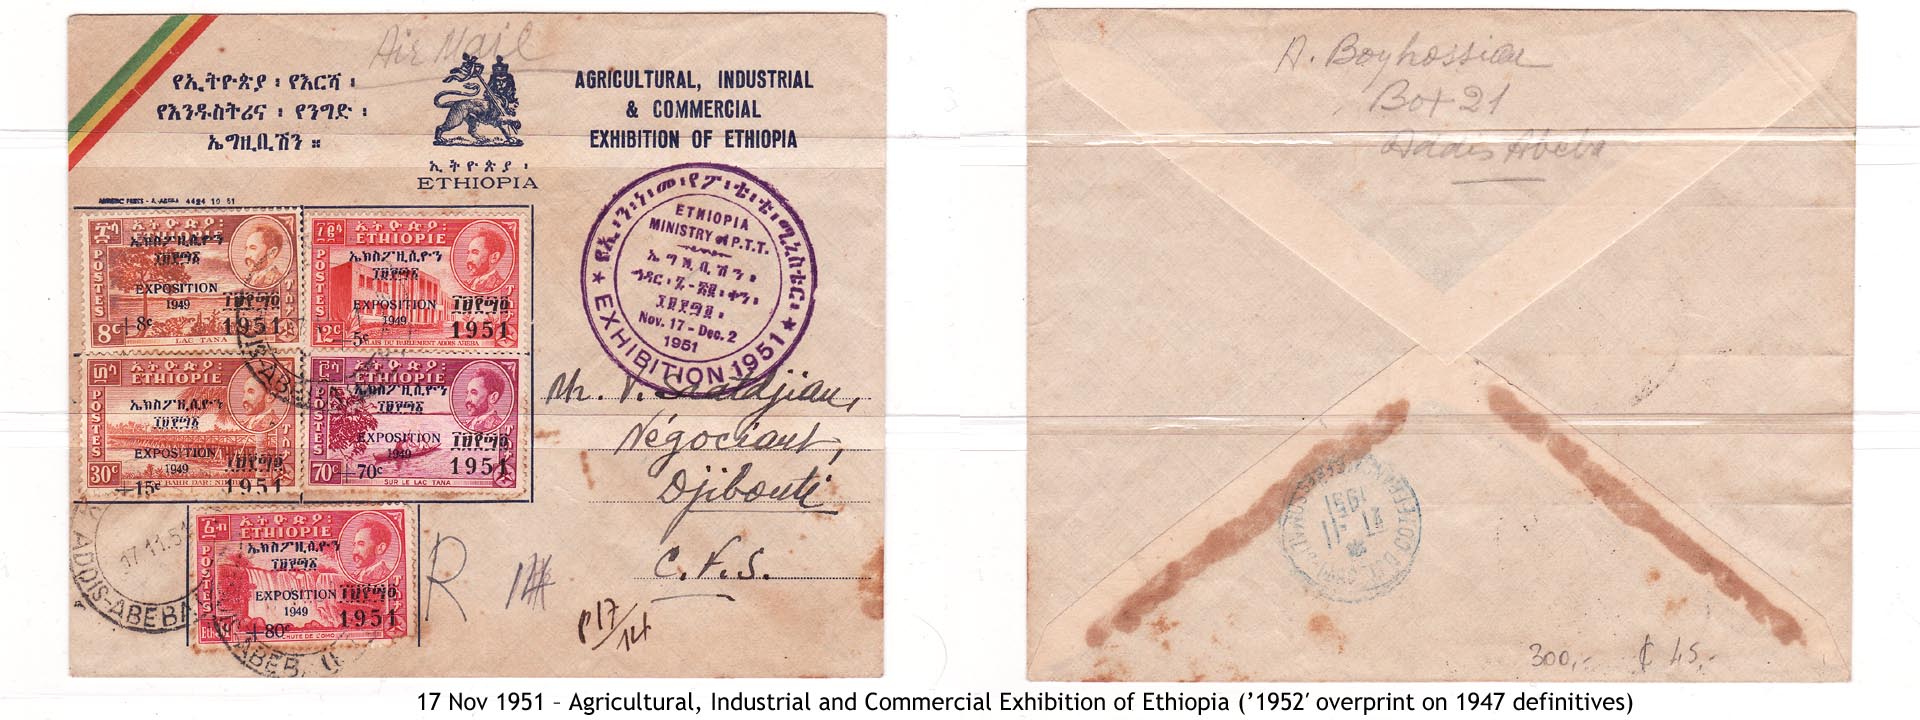 19511117 – Agricultural, Industrial and Commercial Exhibition of Ethiopia (1952 overprint on 1947 definitives)